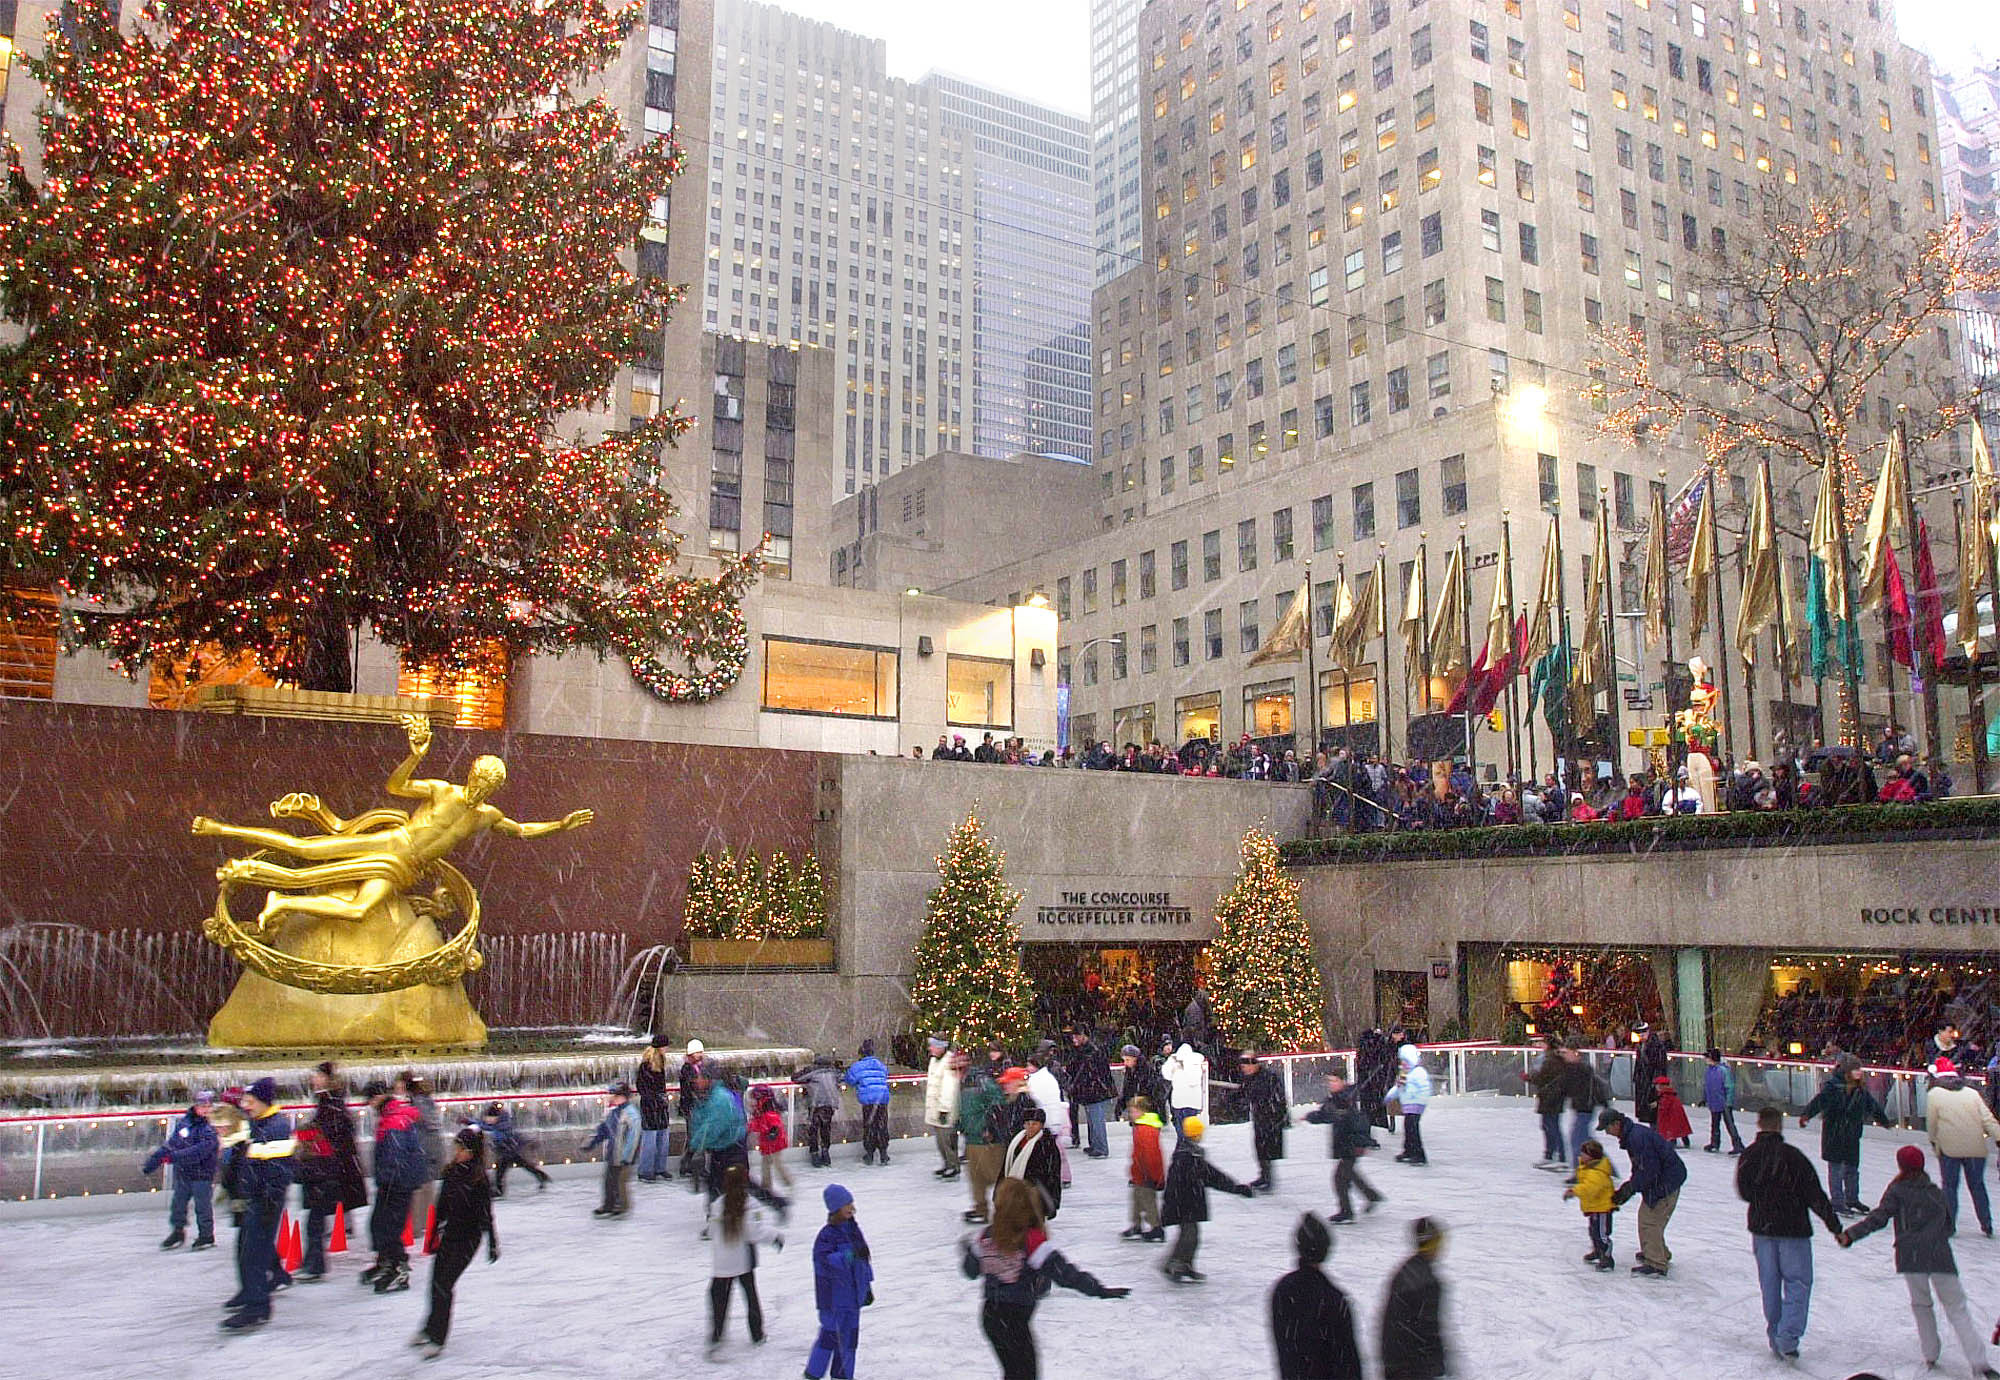 The reveal of the jackets took place at the Rockefeller Center ice rink ©Getty Images